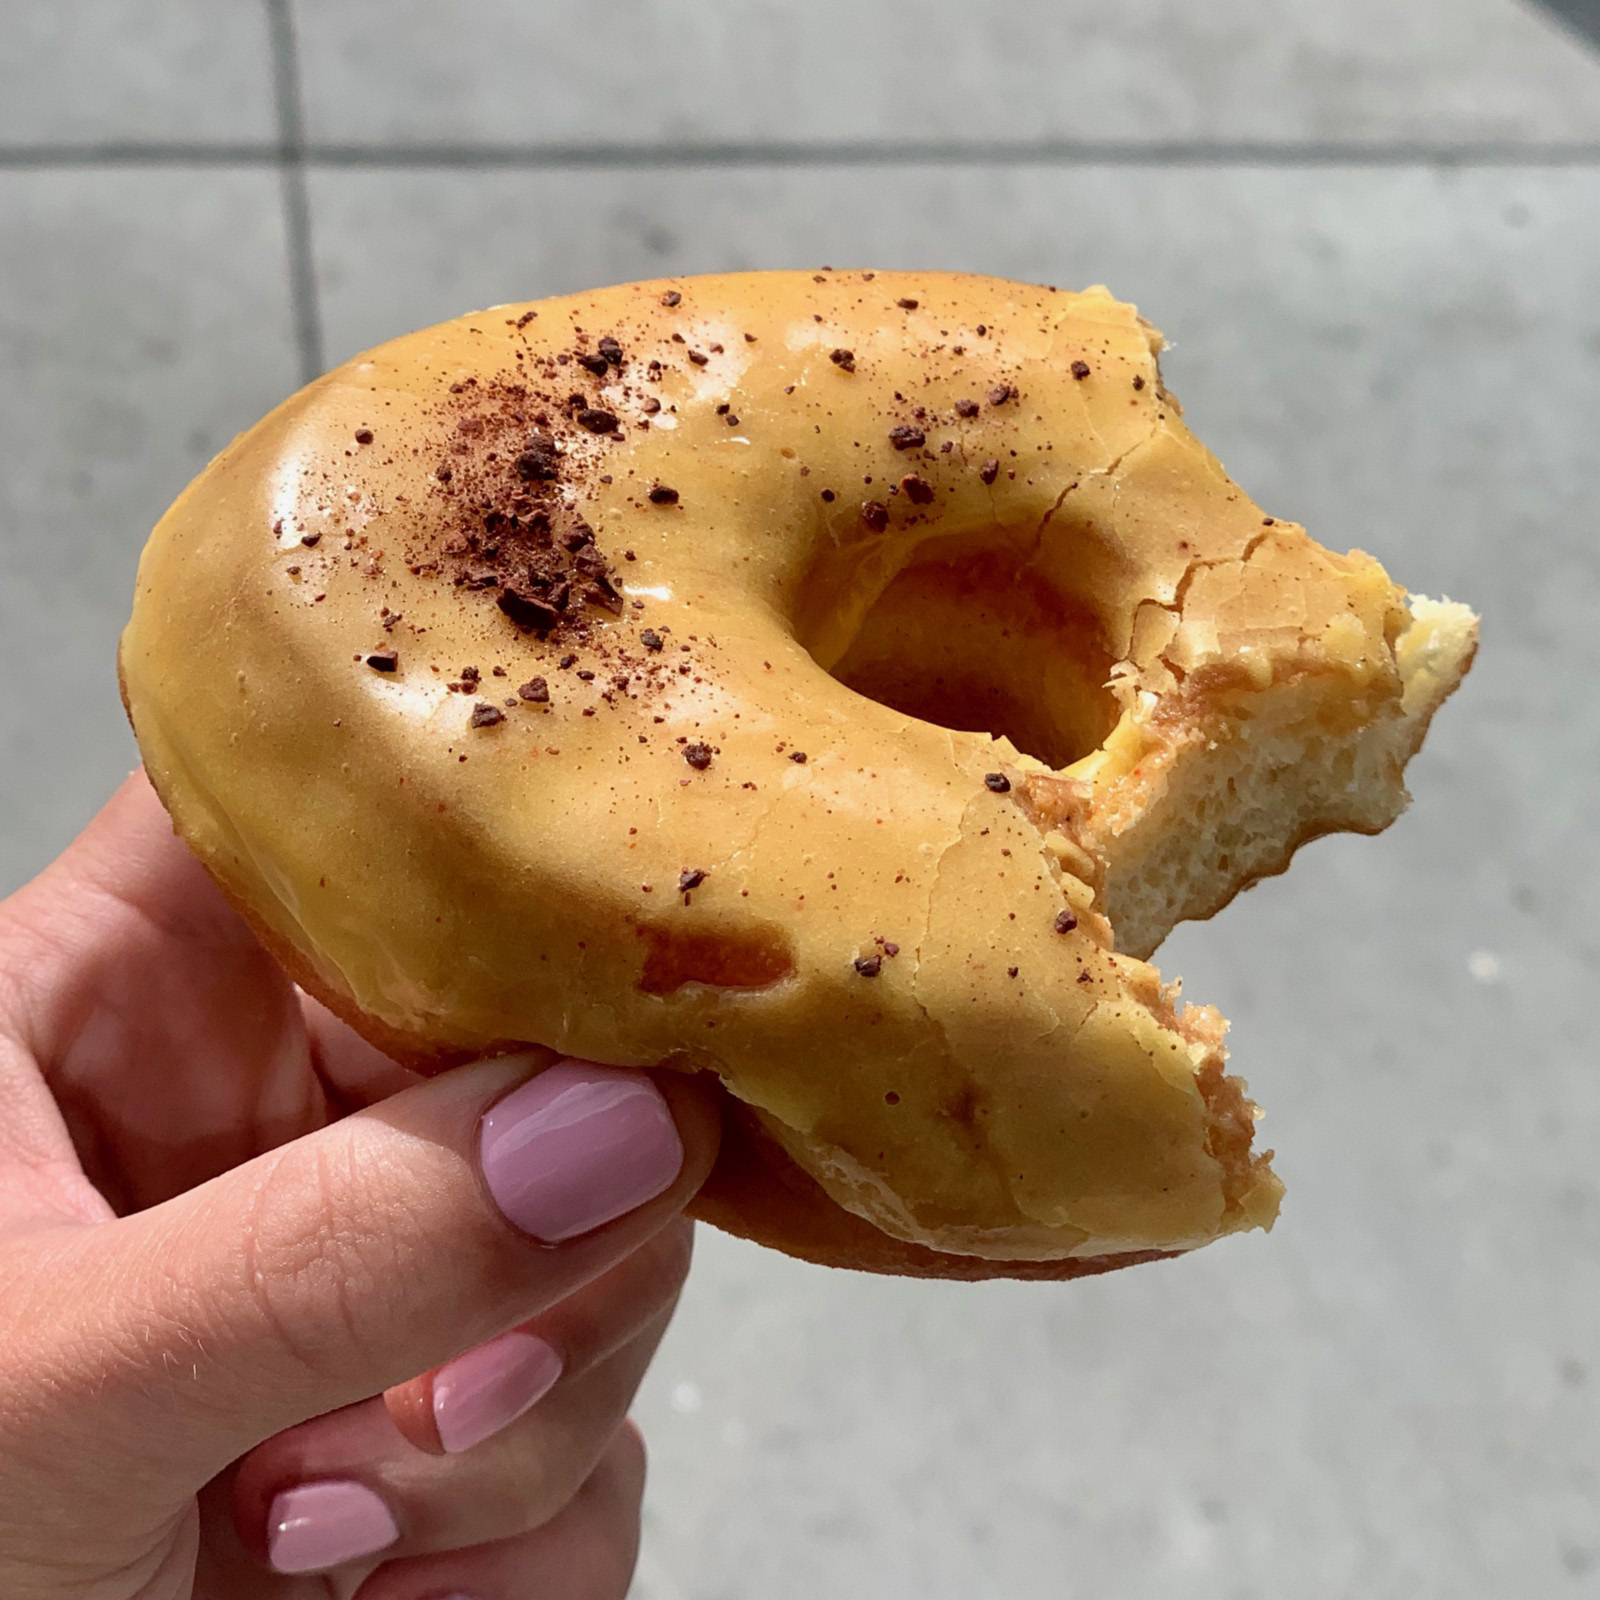 A passion fruit donut with bites out of it from Blue Star Donut in Portland, Oregon